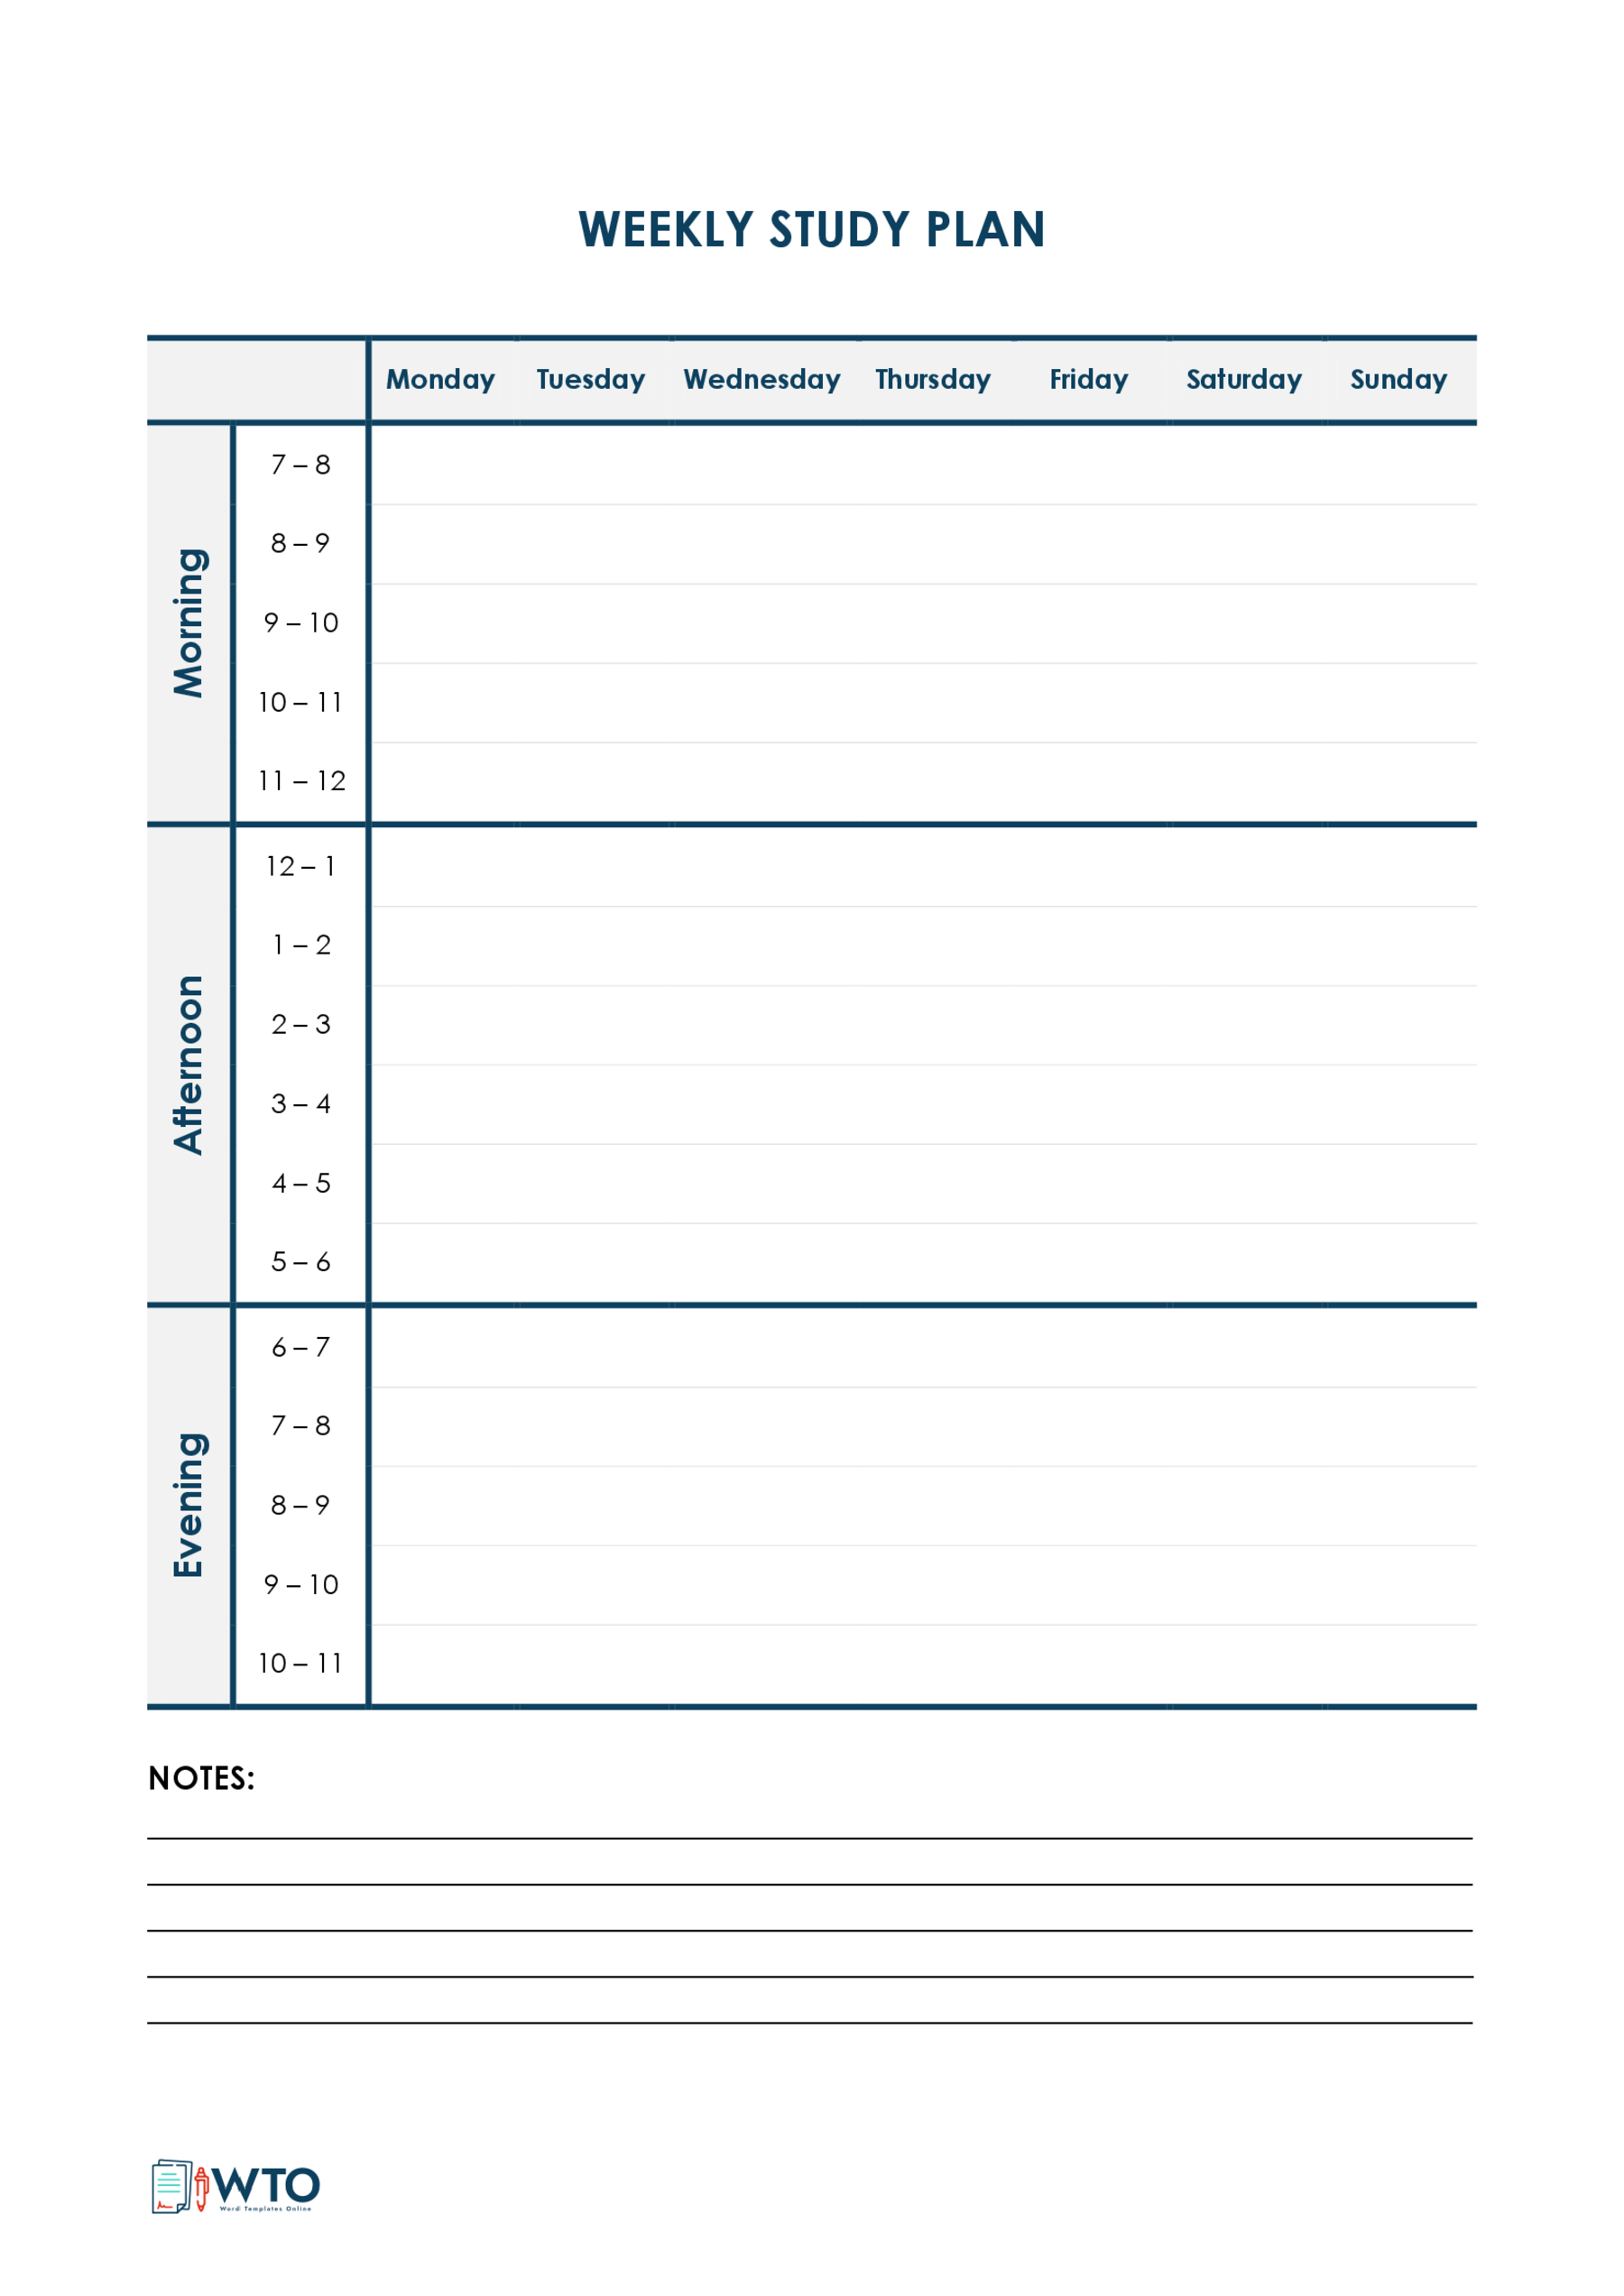 Weekly Study Plan Example - Sample Document